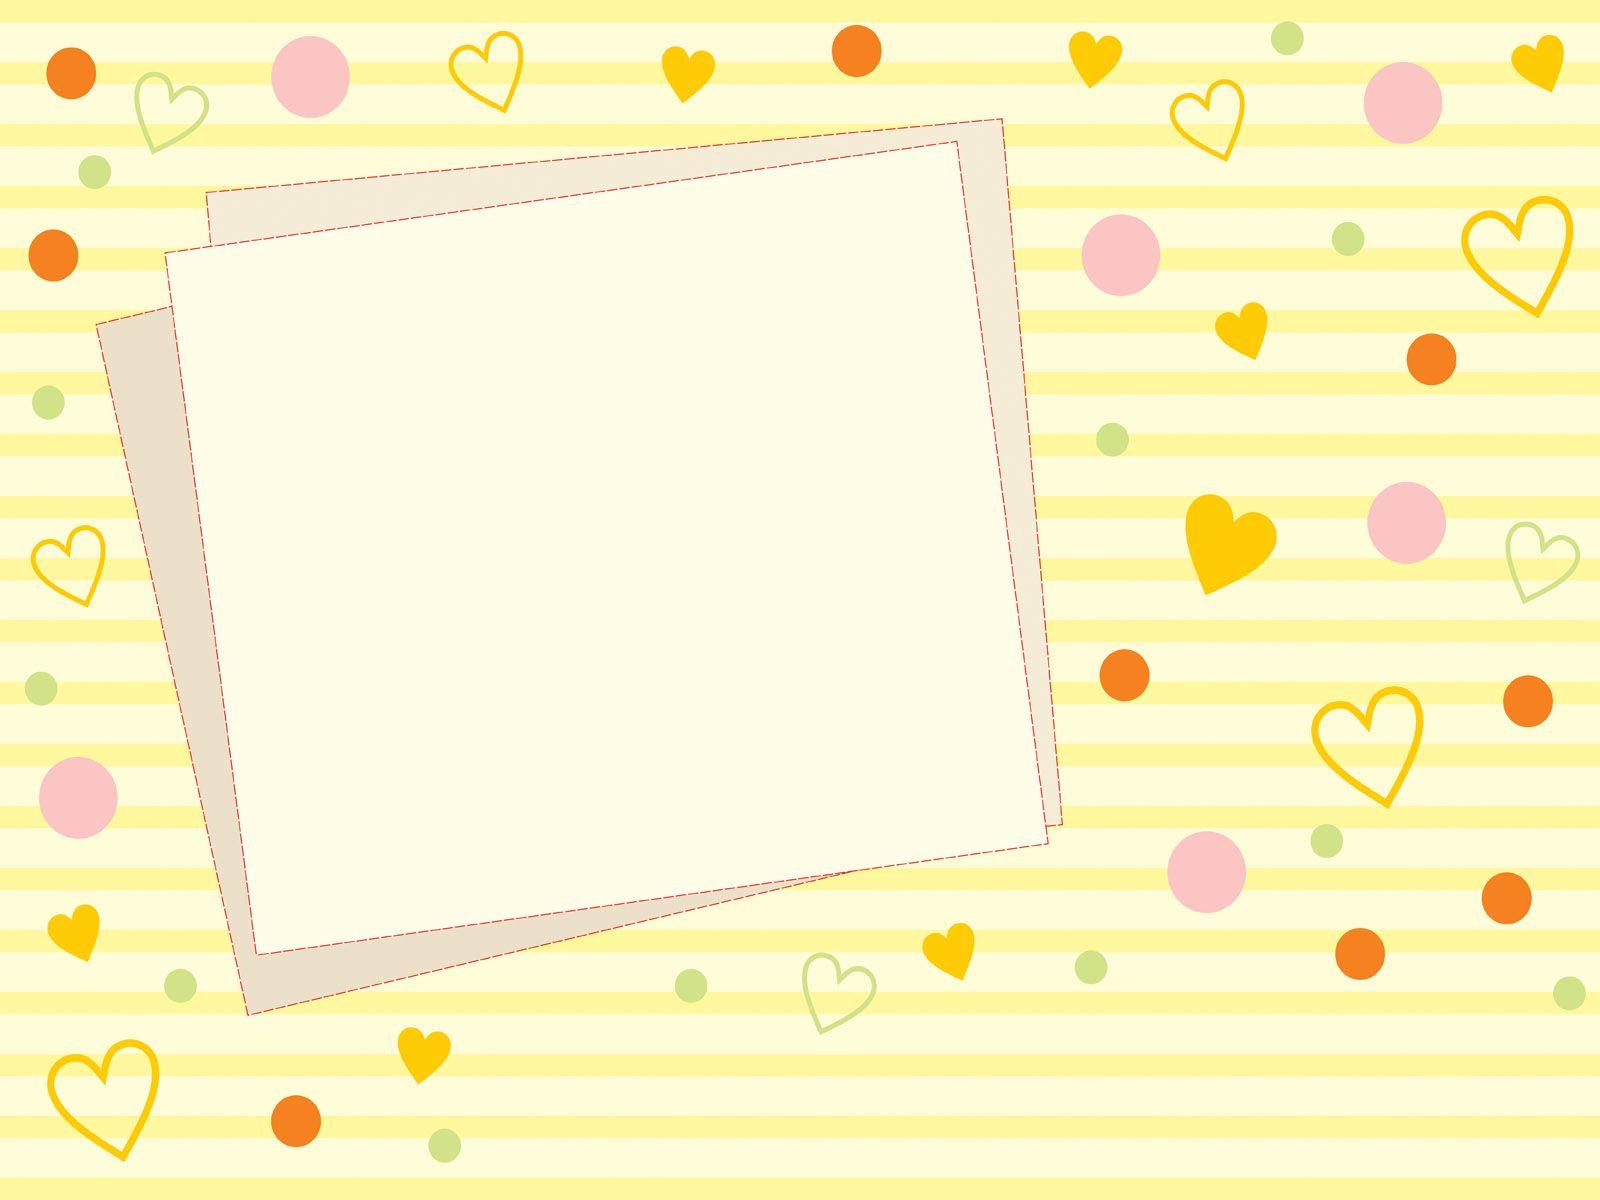 powerpoint backgrounds cute